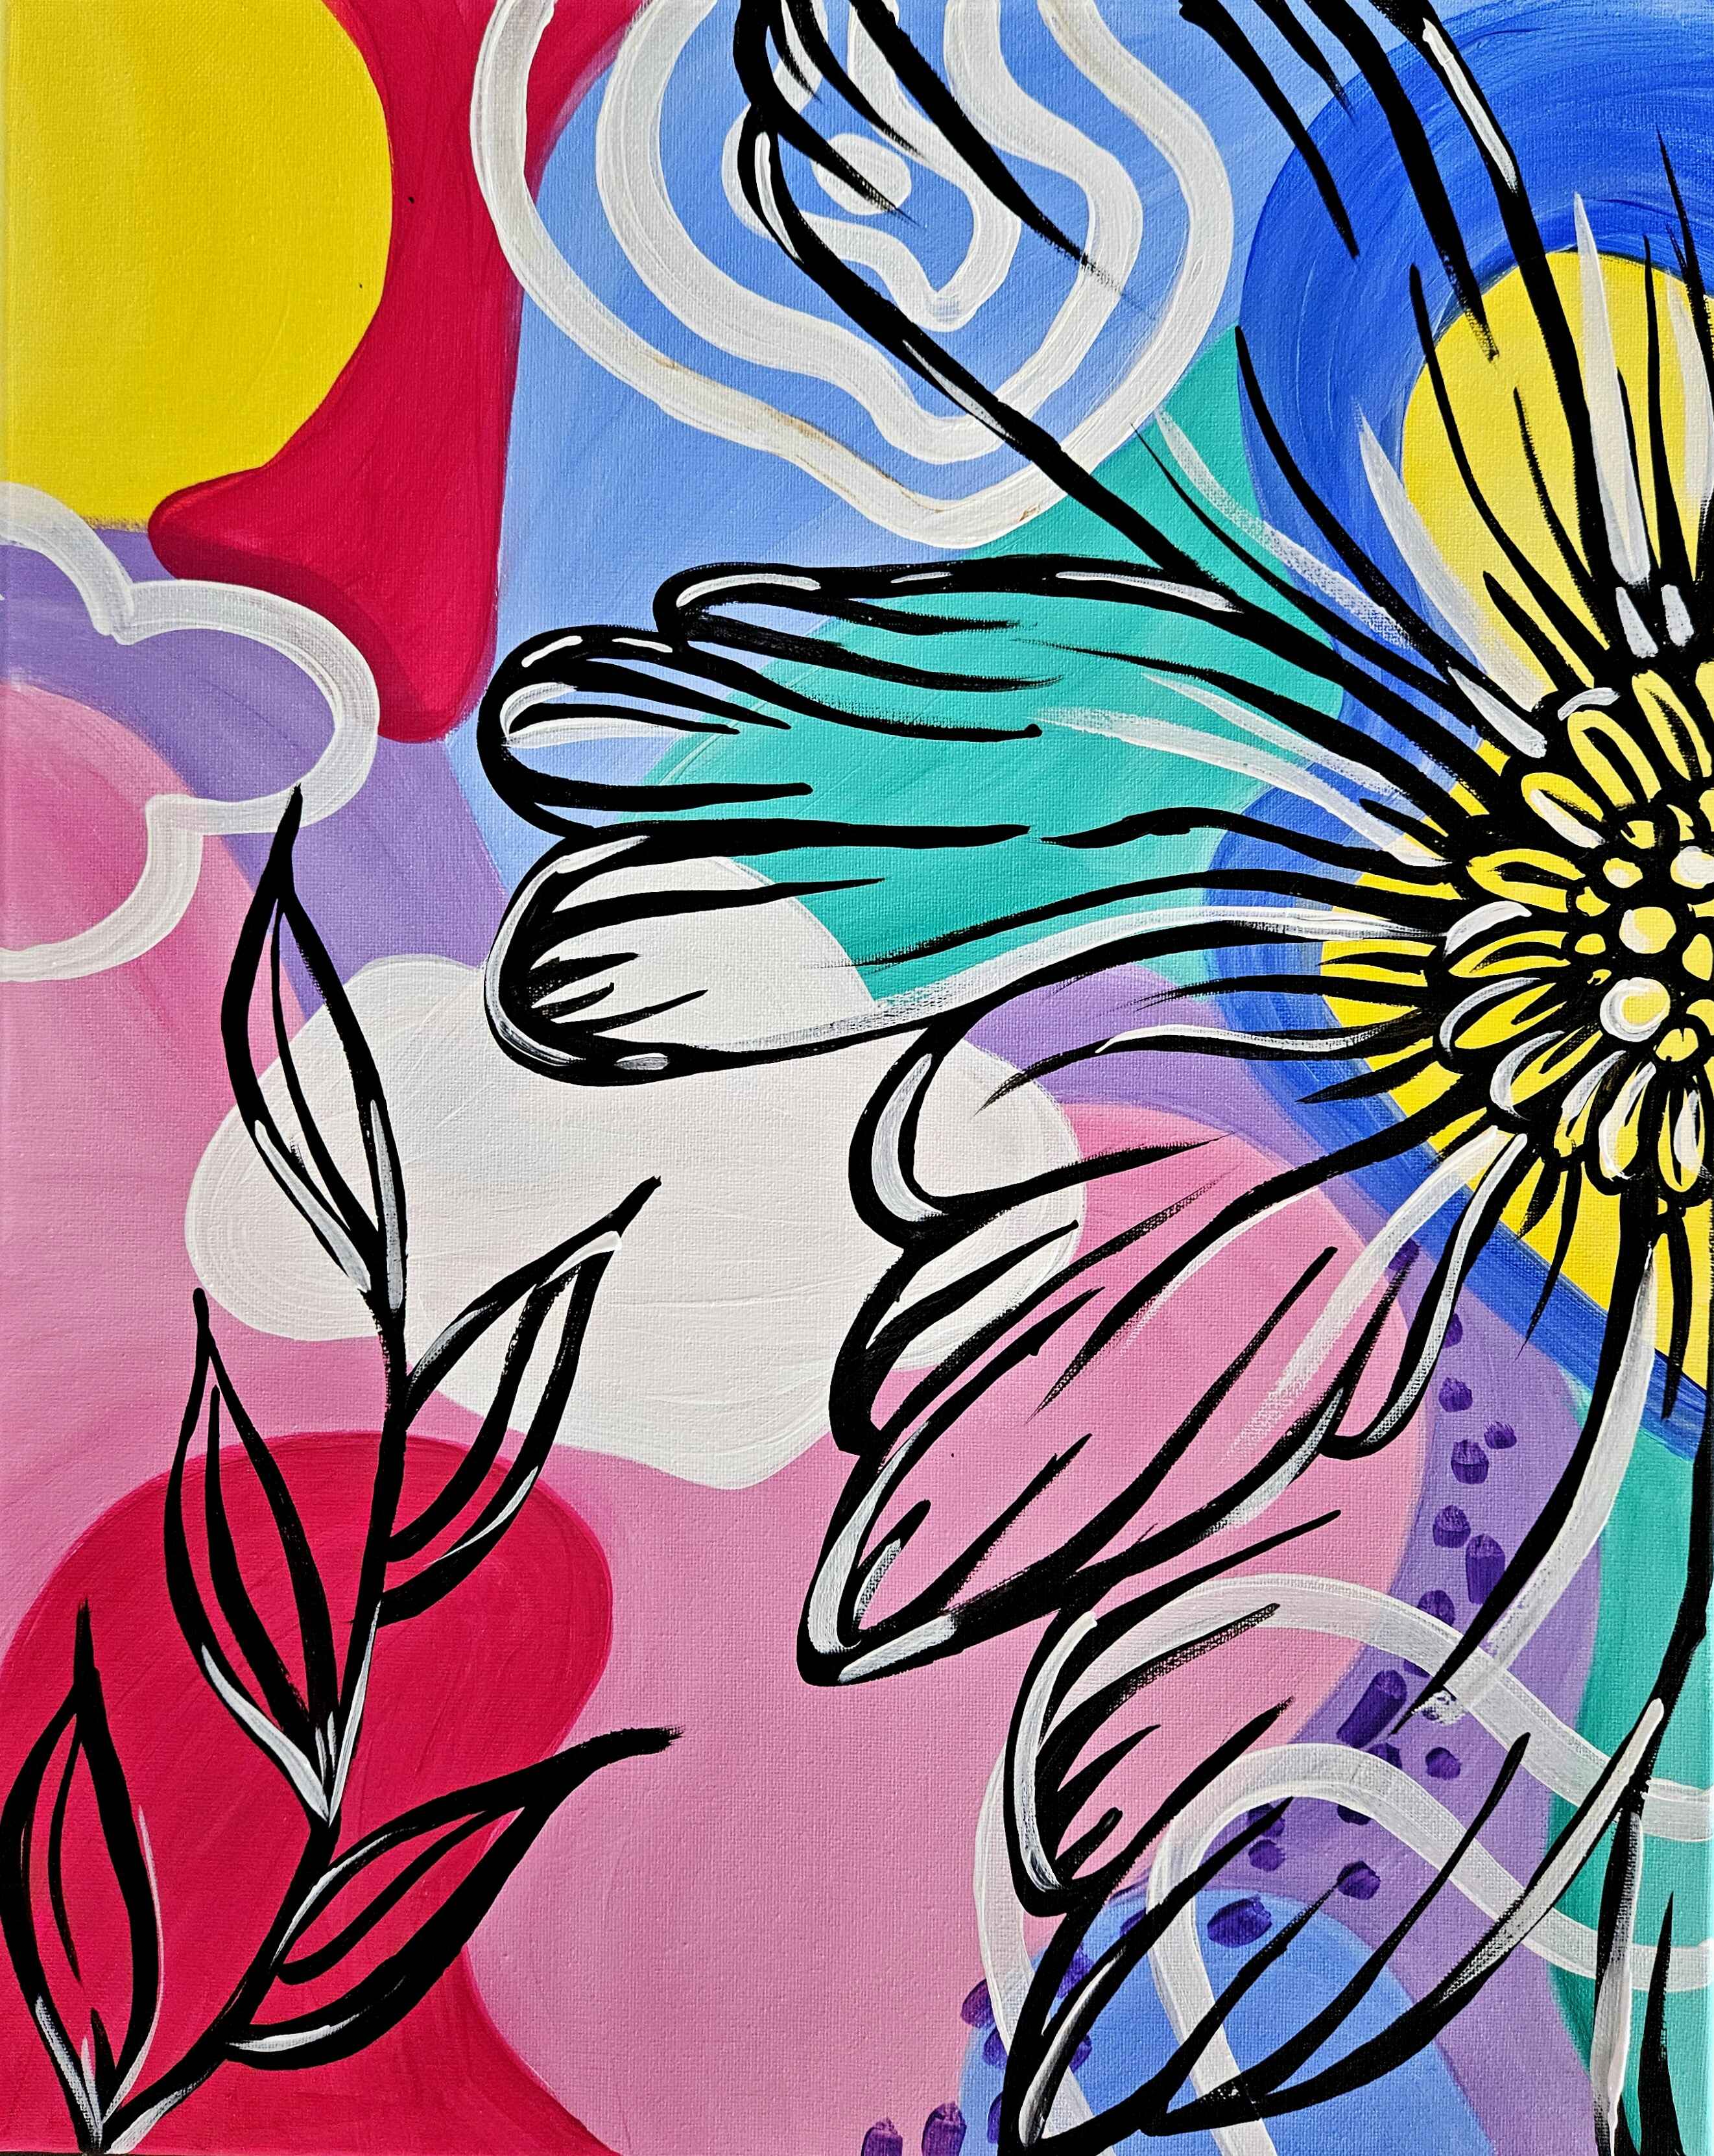 Bloom Wildly - 16x20 Acrylic on Canvas